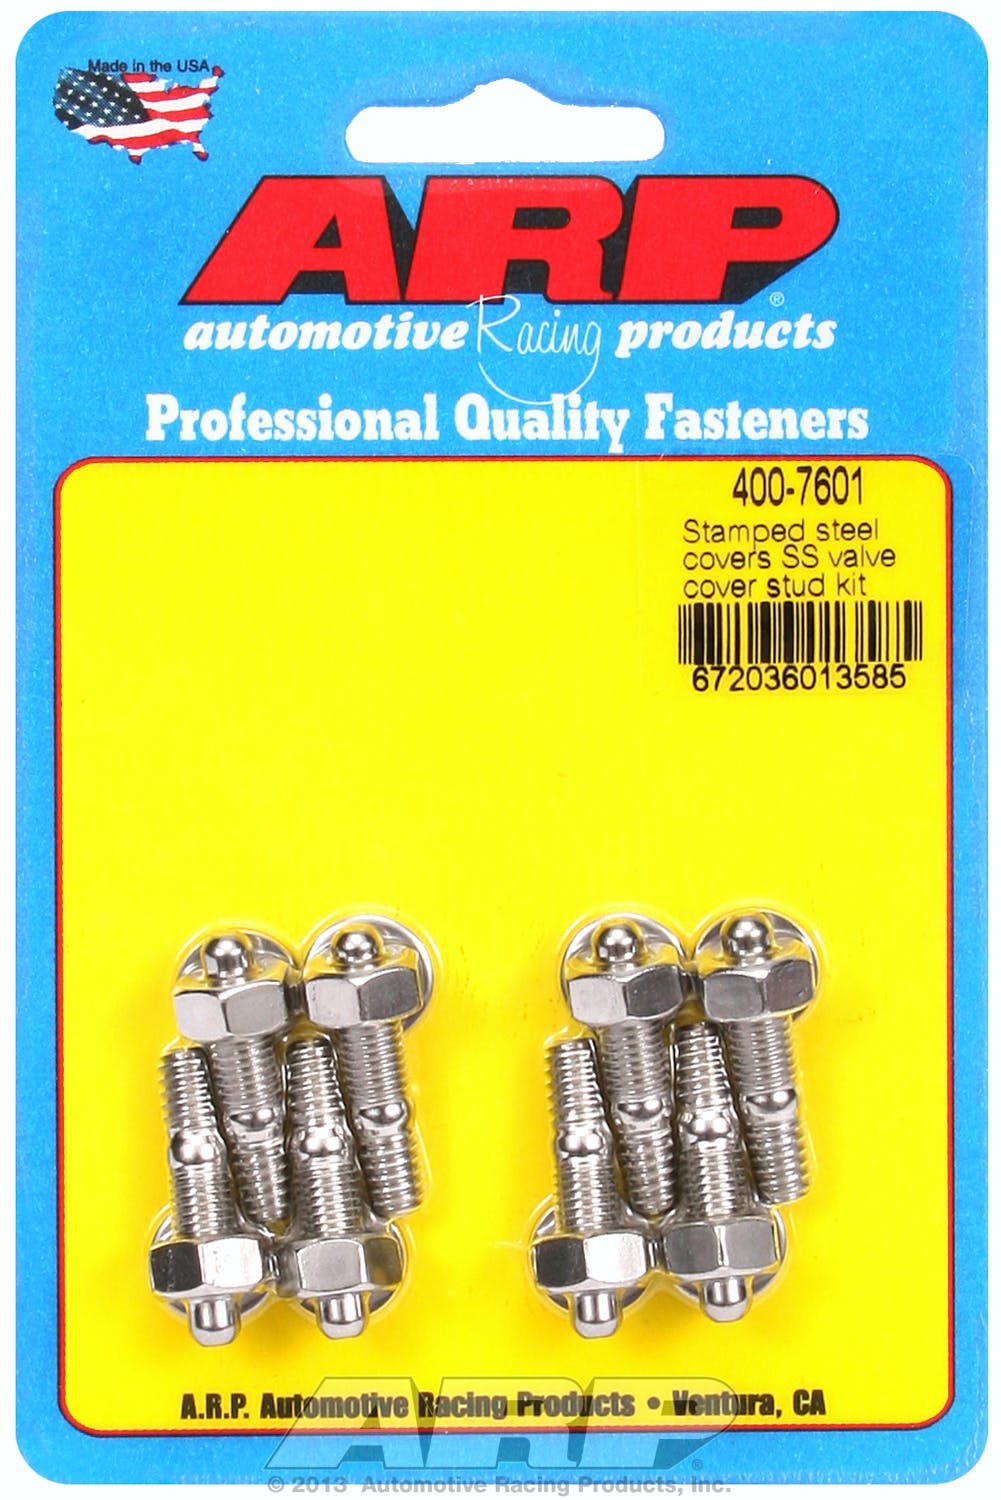 ARP 400-7601 Stamped steel covers SS valve cover stud kit